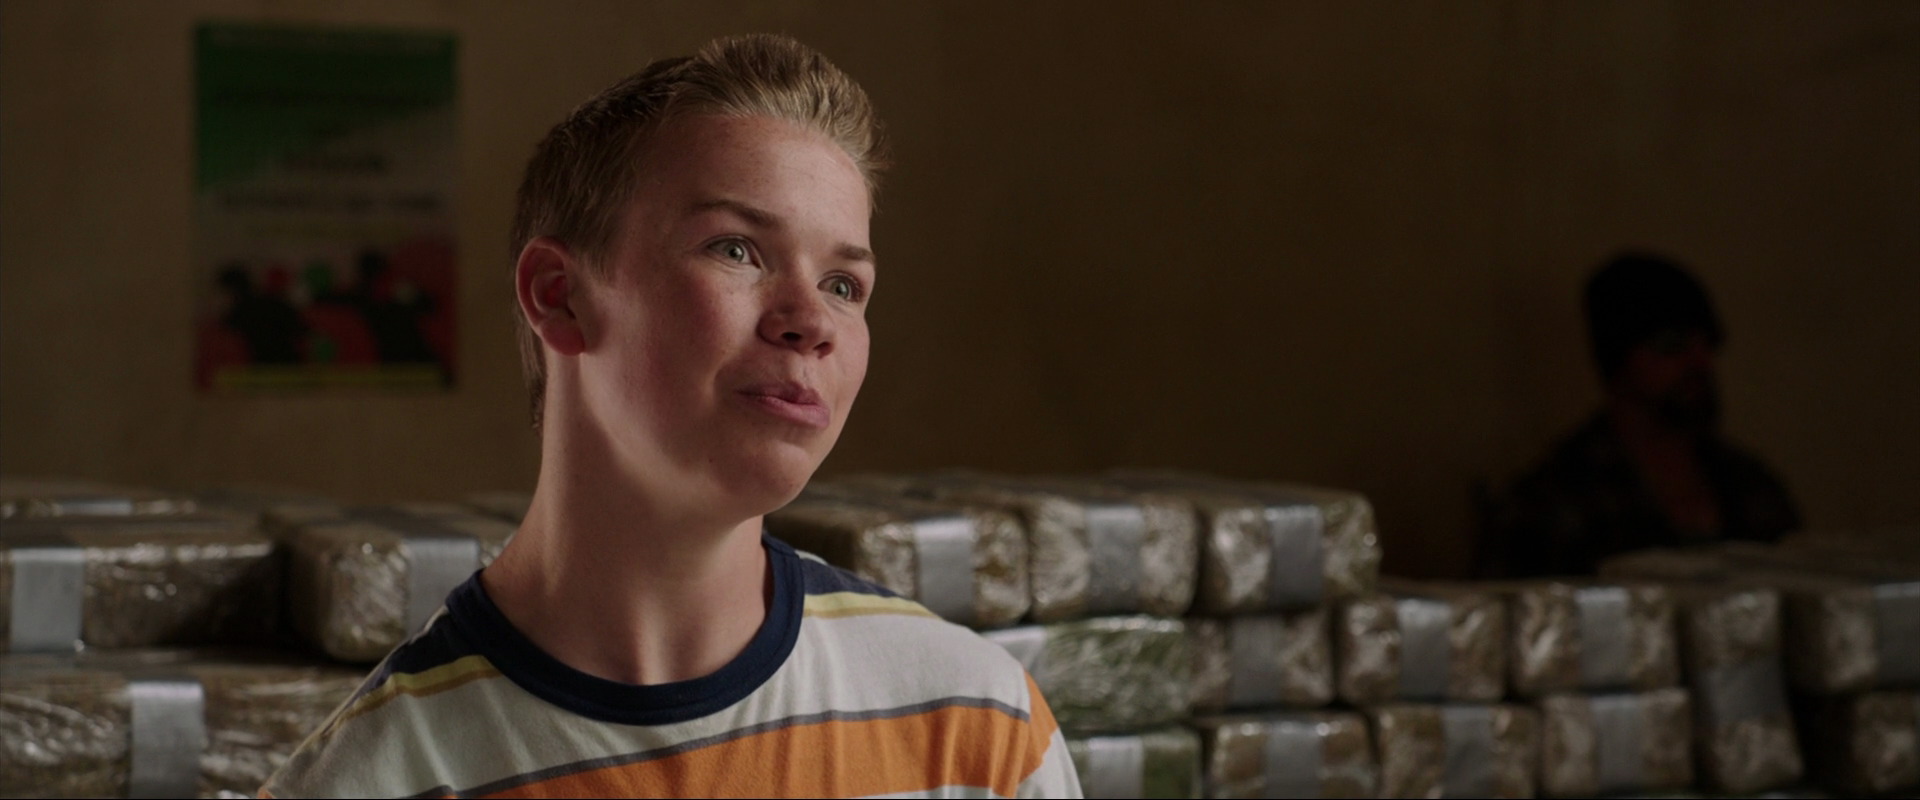 Screen Captures - were-the-millers-0419 - Will Poulter Photo Gallery.